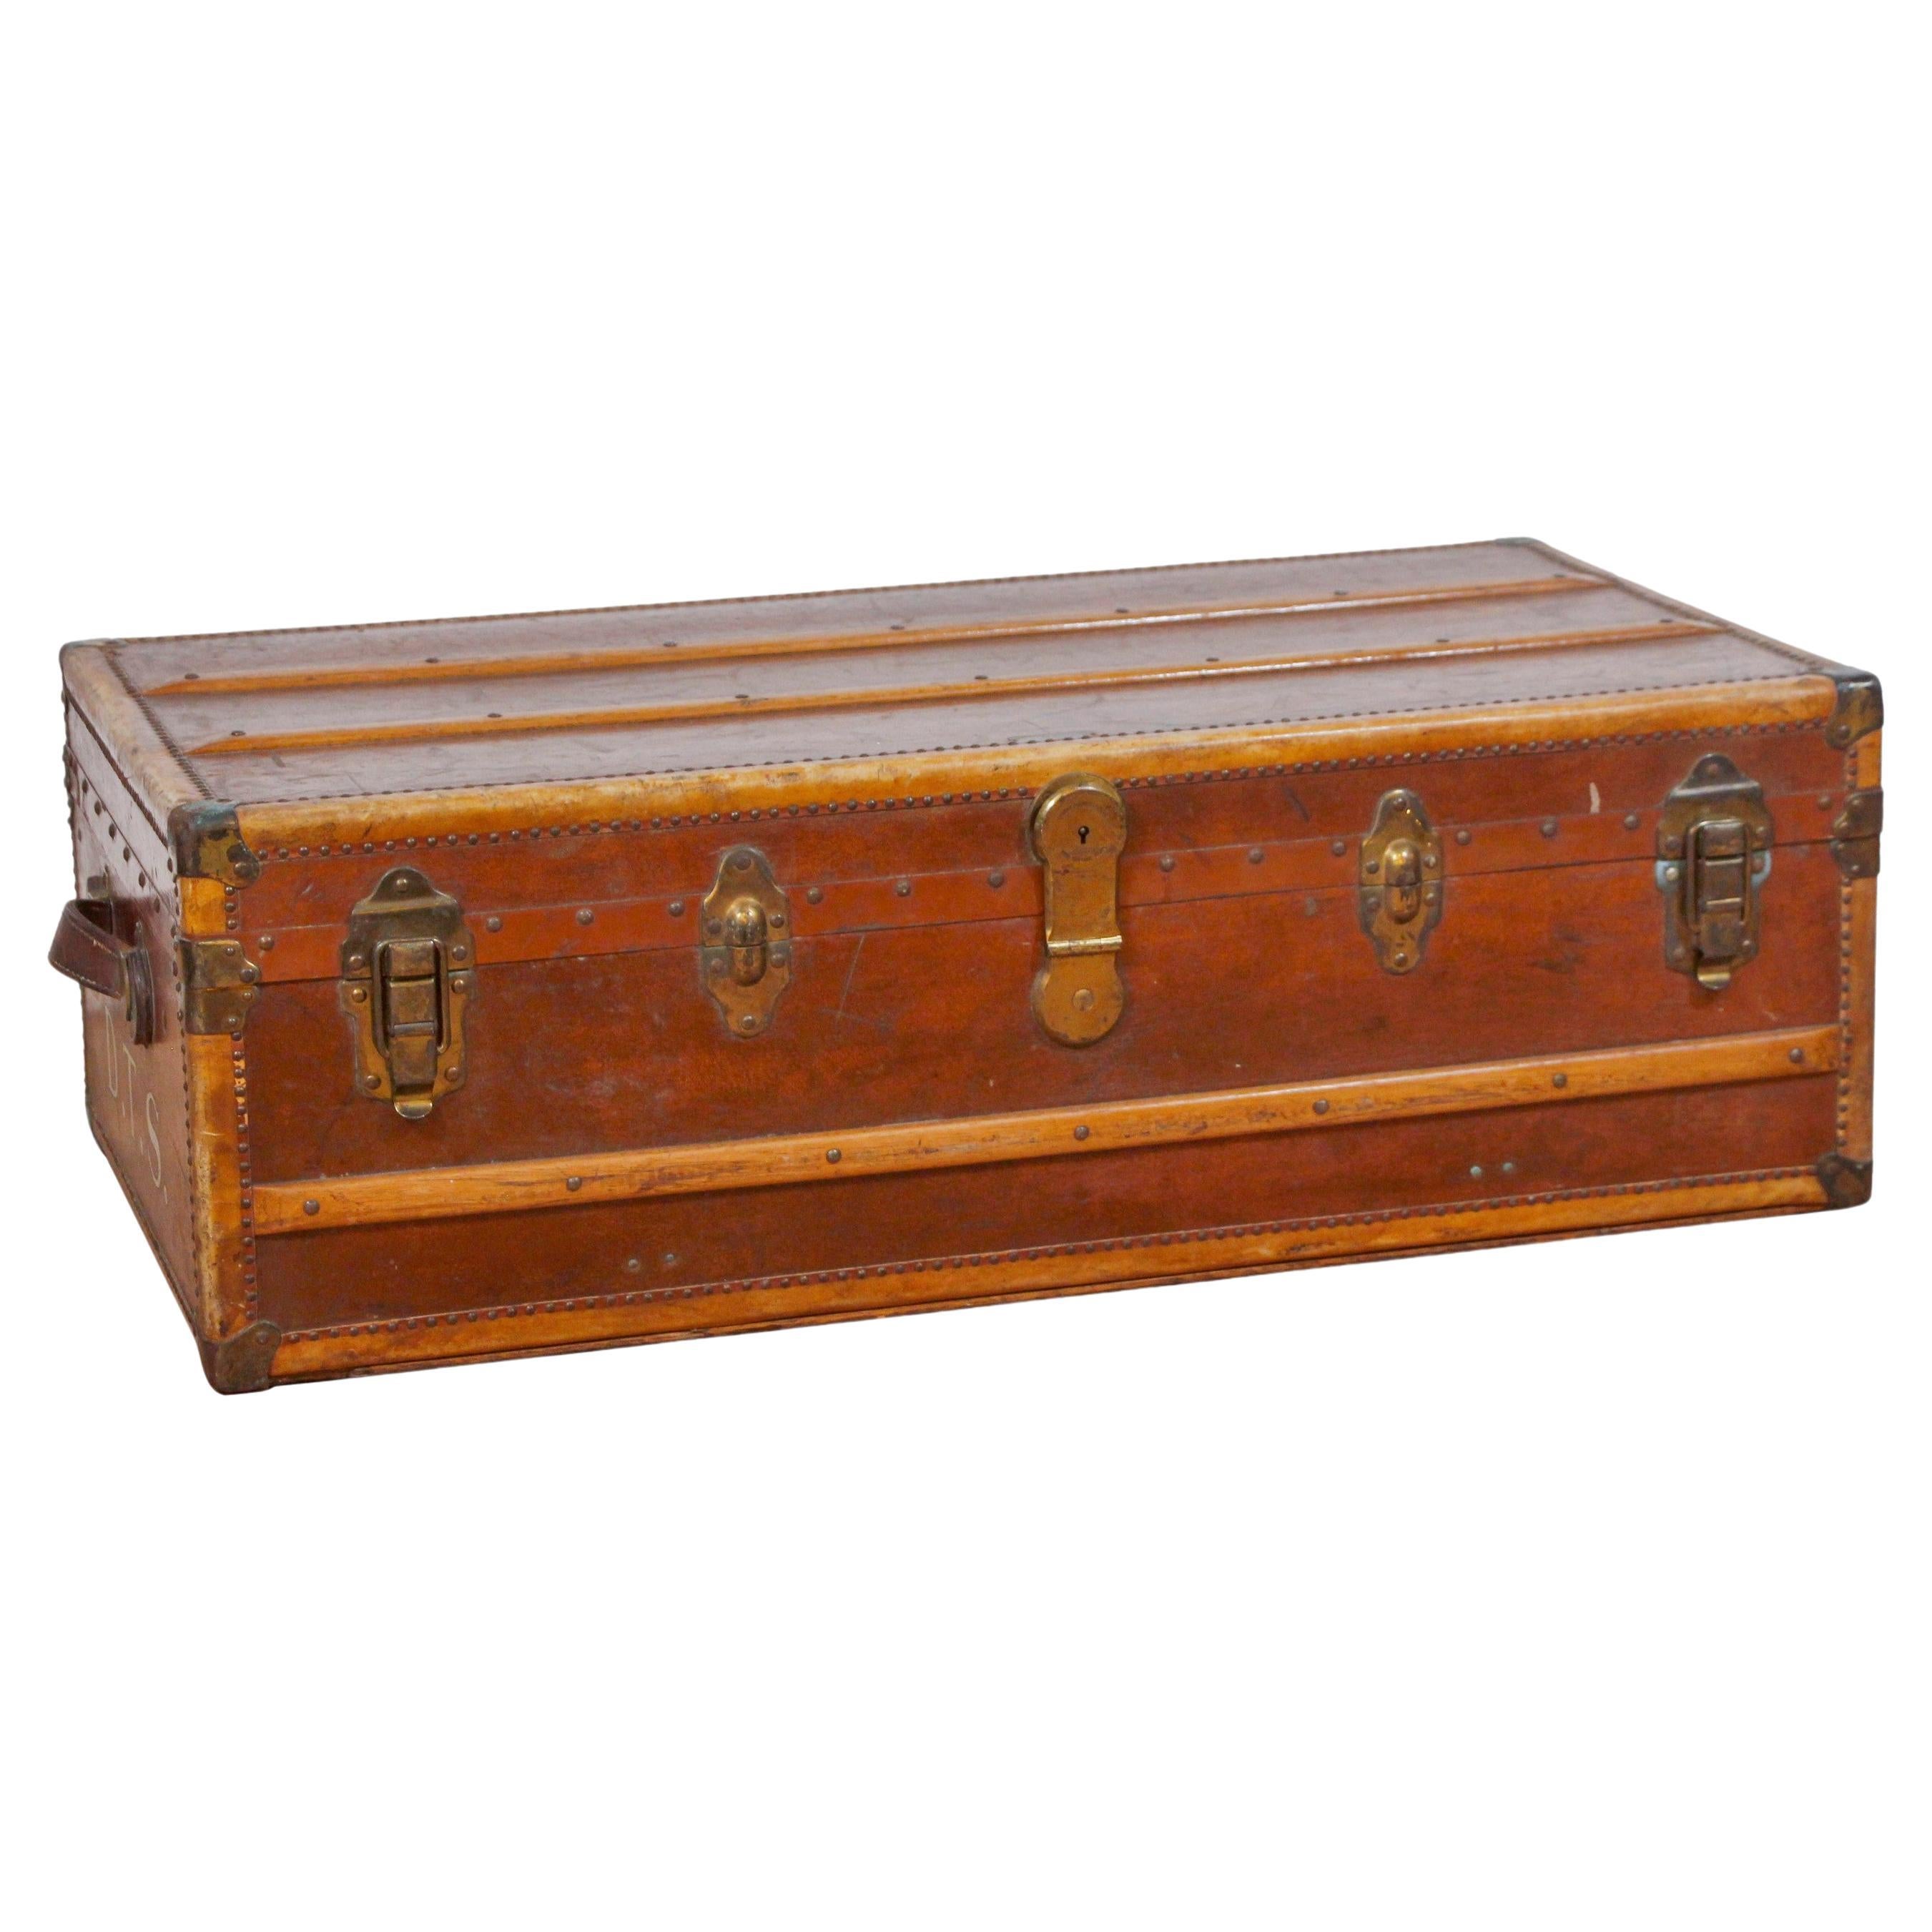 1900s Wood Trunk Luggage, Arthur Gilmore Inc. W/ Leather Handles